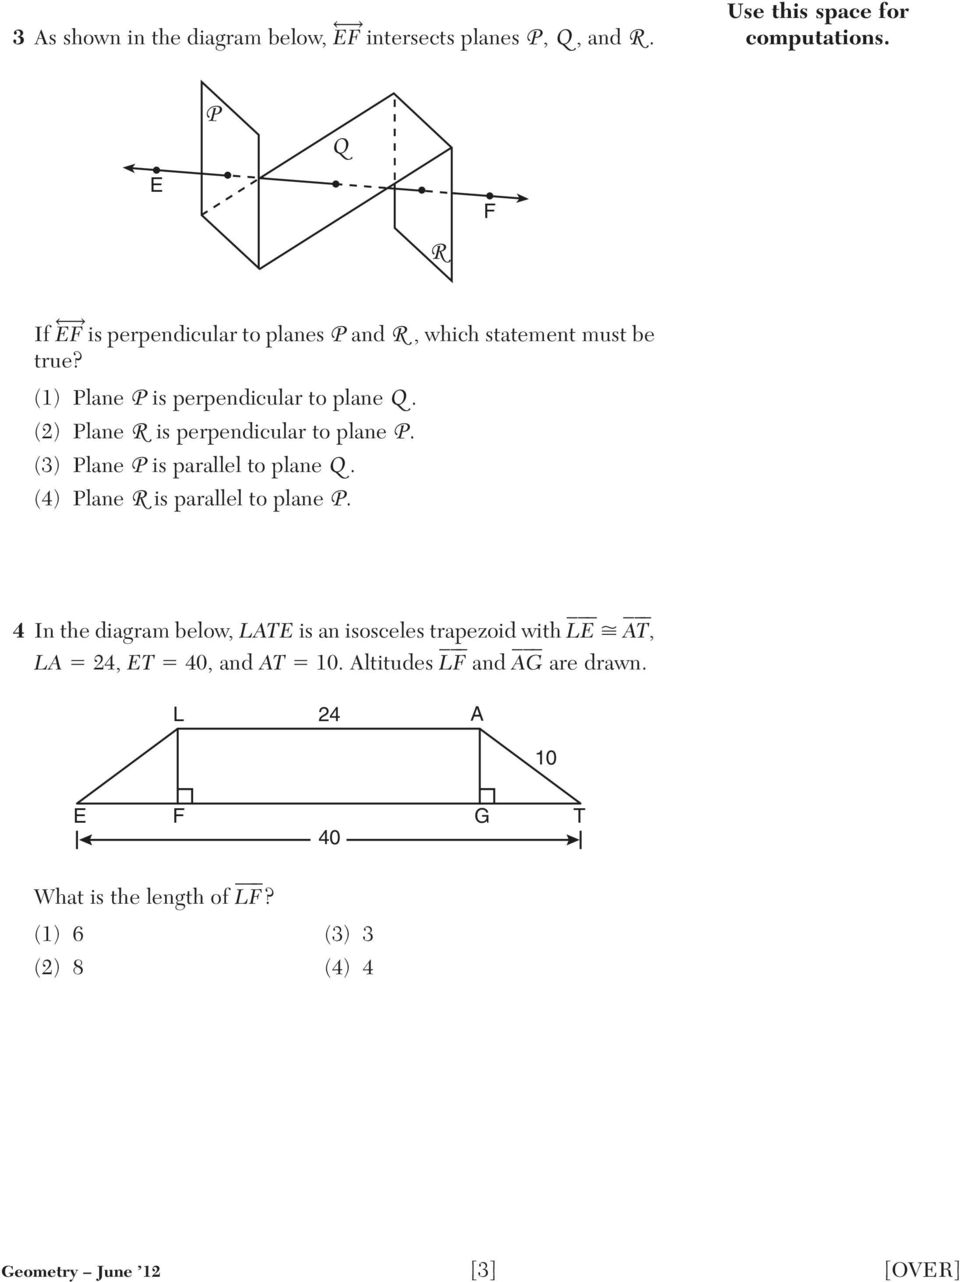 (2) Plane R is perpendicular to plane P. (3) Plane P is parallel to plane Q. (4) Plane R is parallel to plane P.